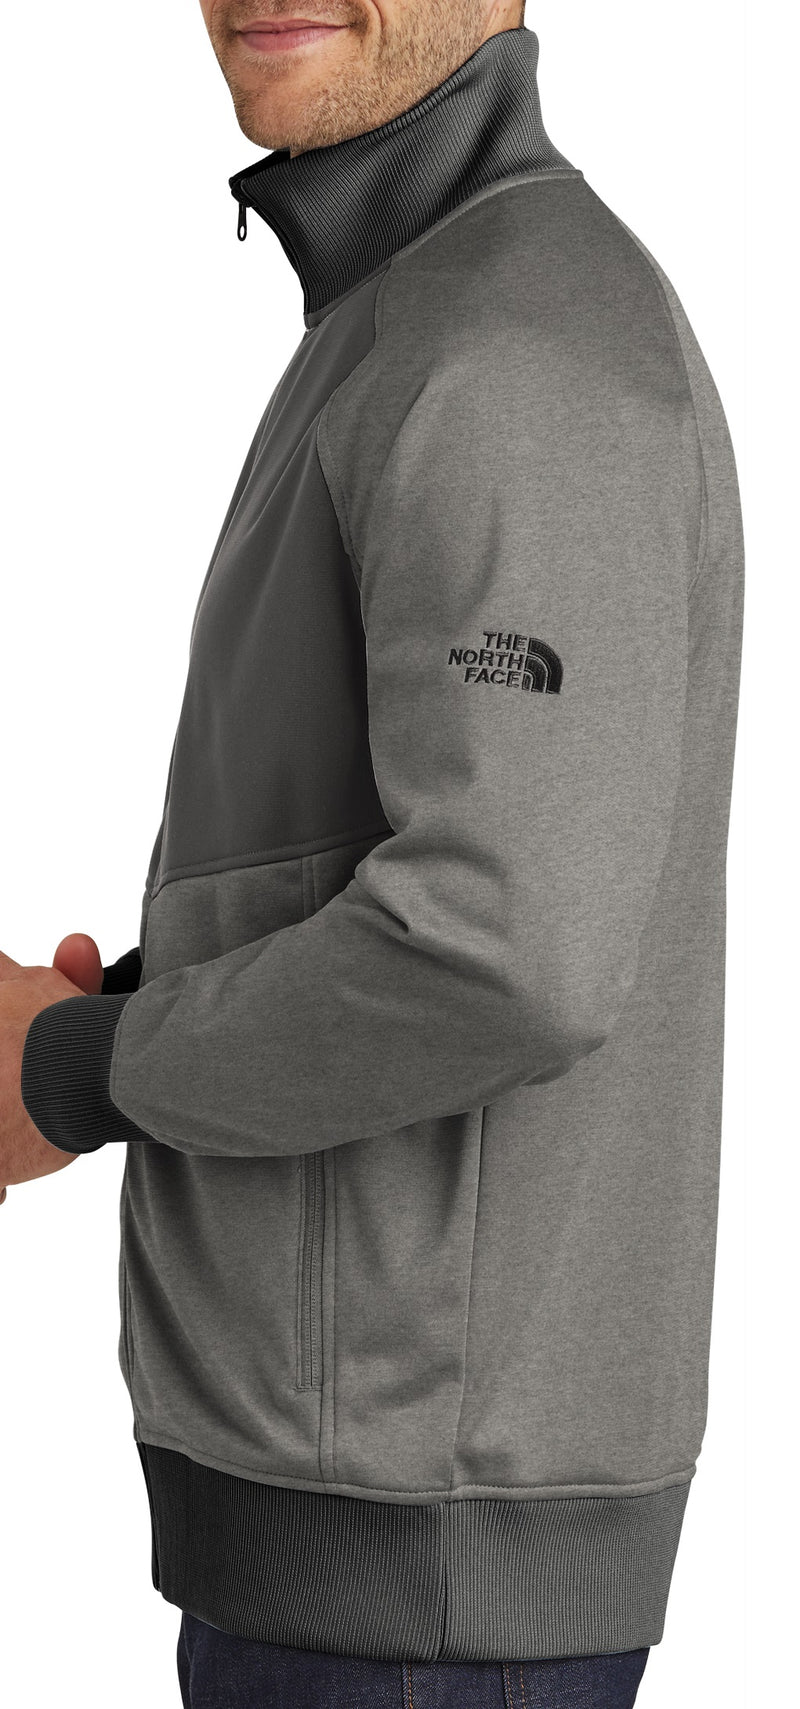 The North Face [NF0A3SEW] Tech Full-Zip Fleece Jacket. Live Chat For Bulk Discounts.